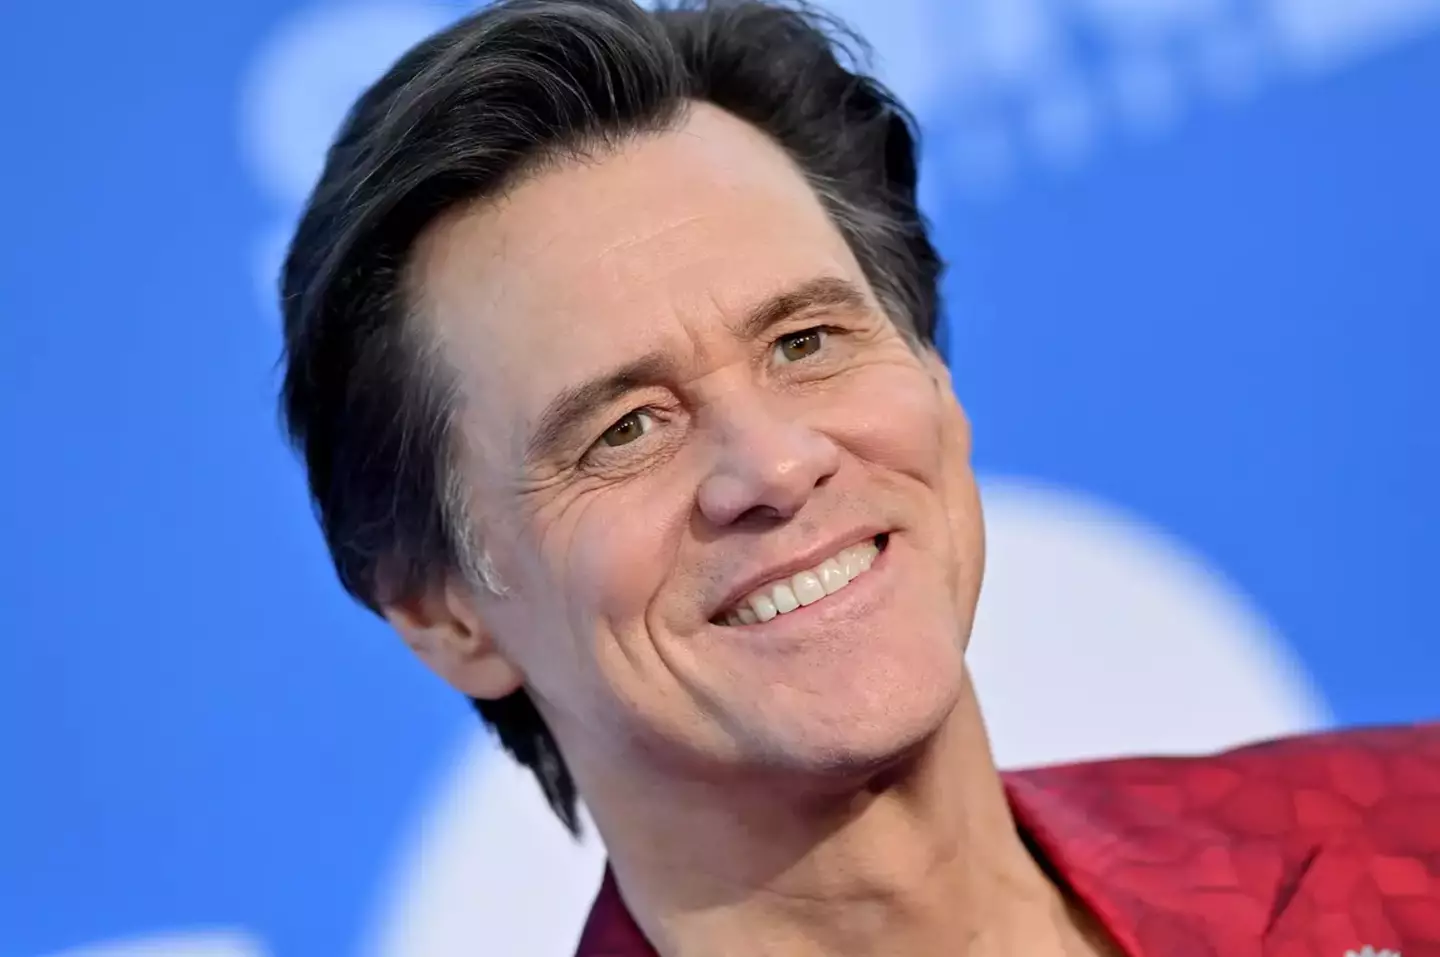 Jim Carrey will not be making a return for a potential sequel.